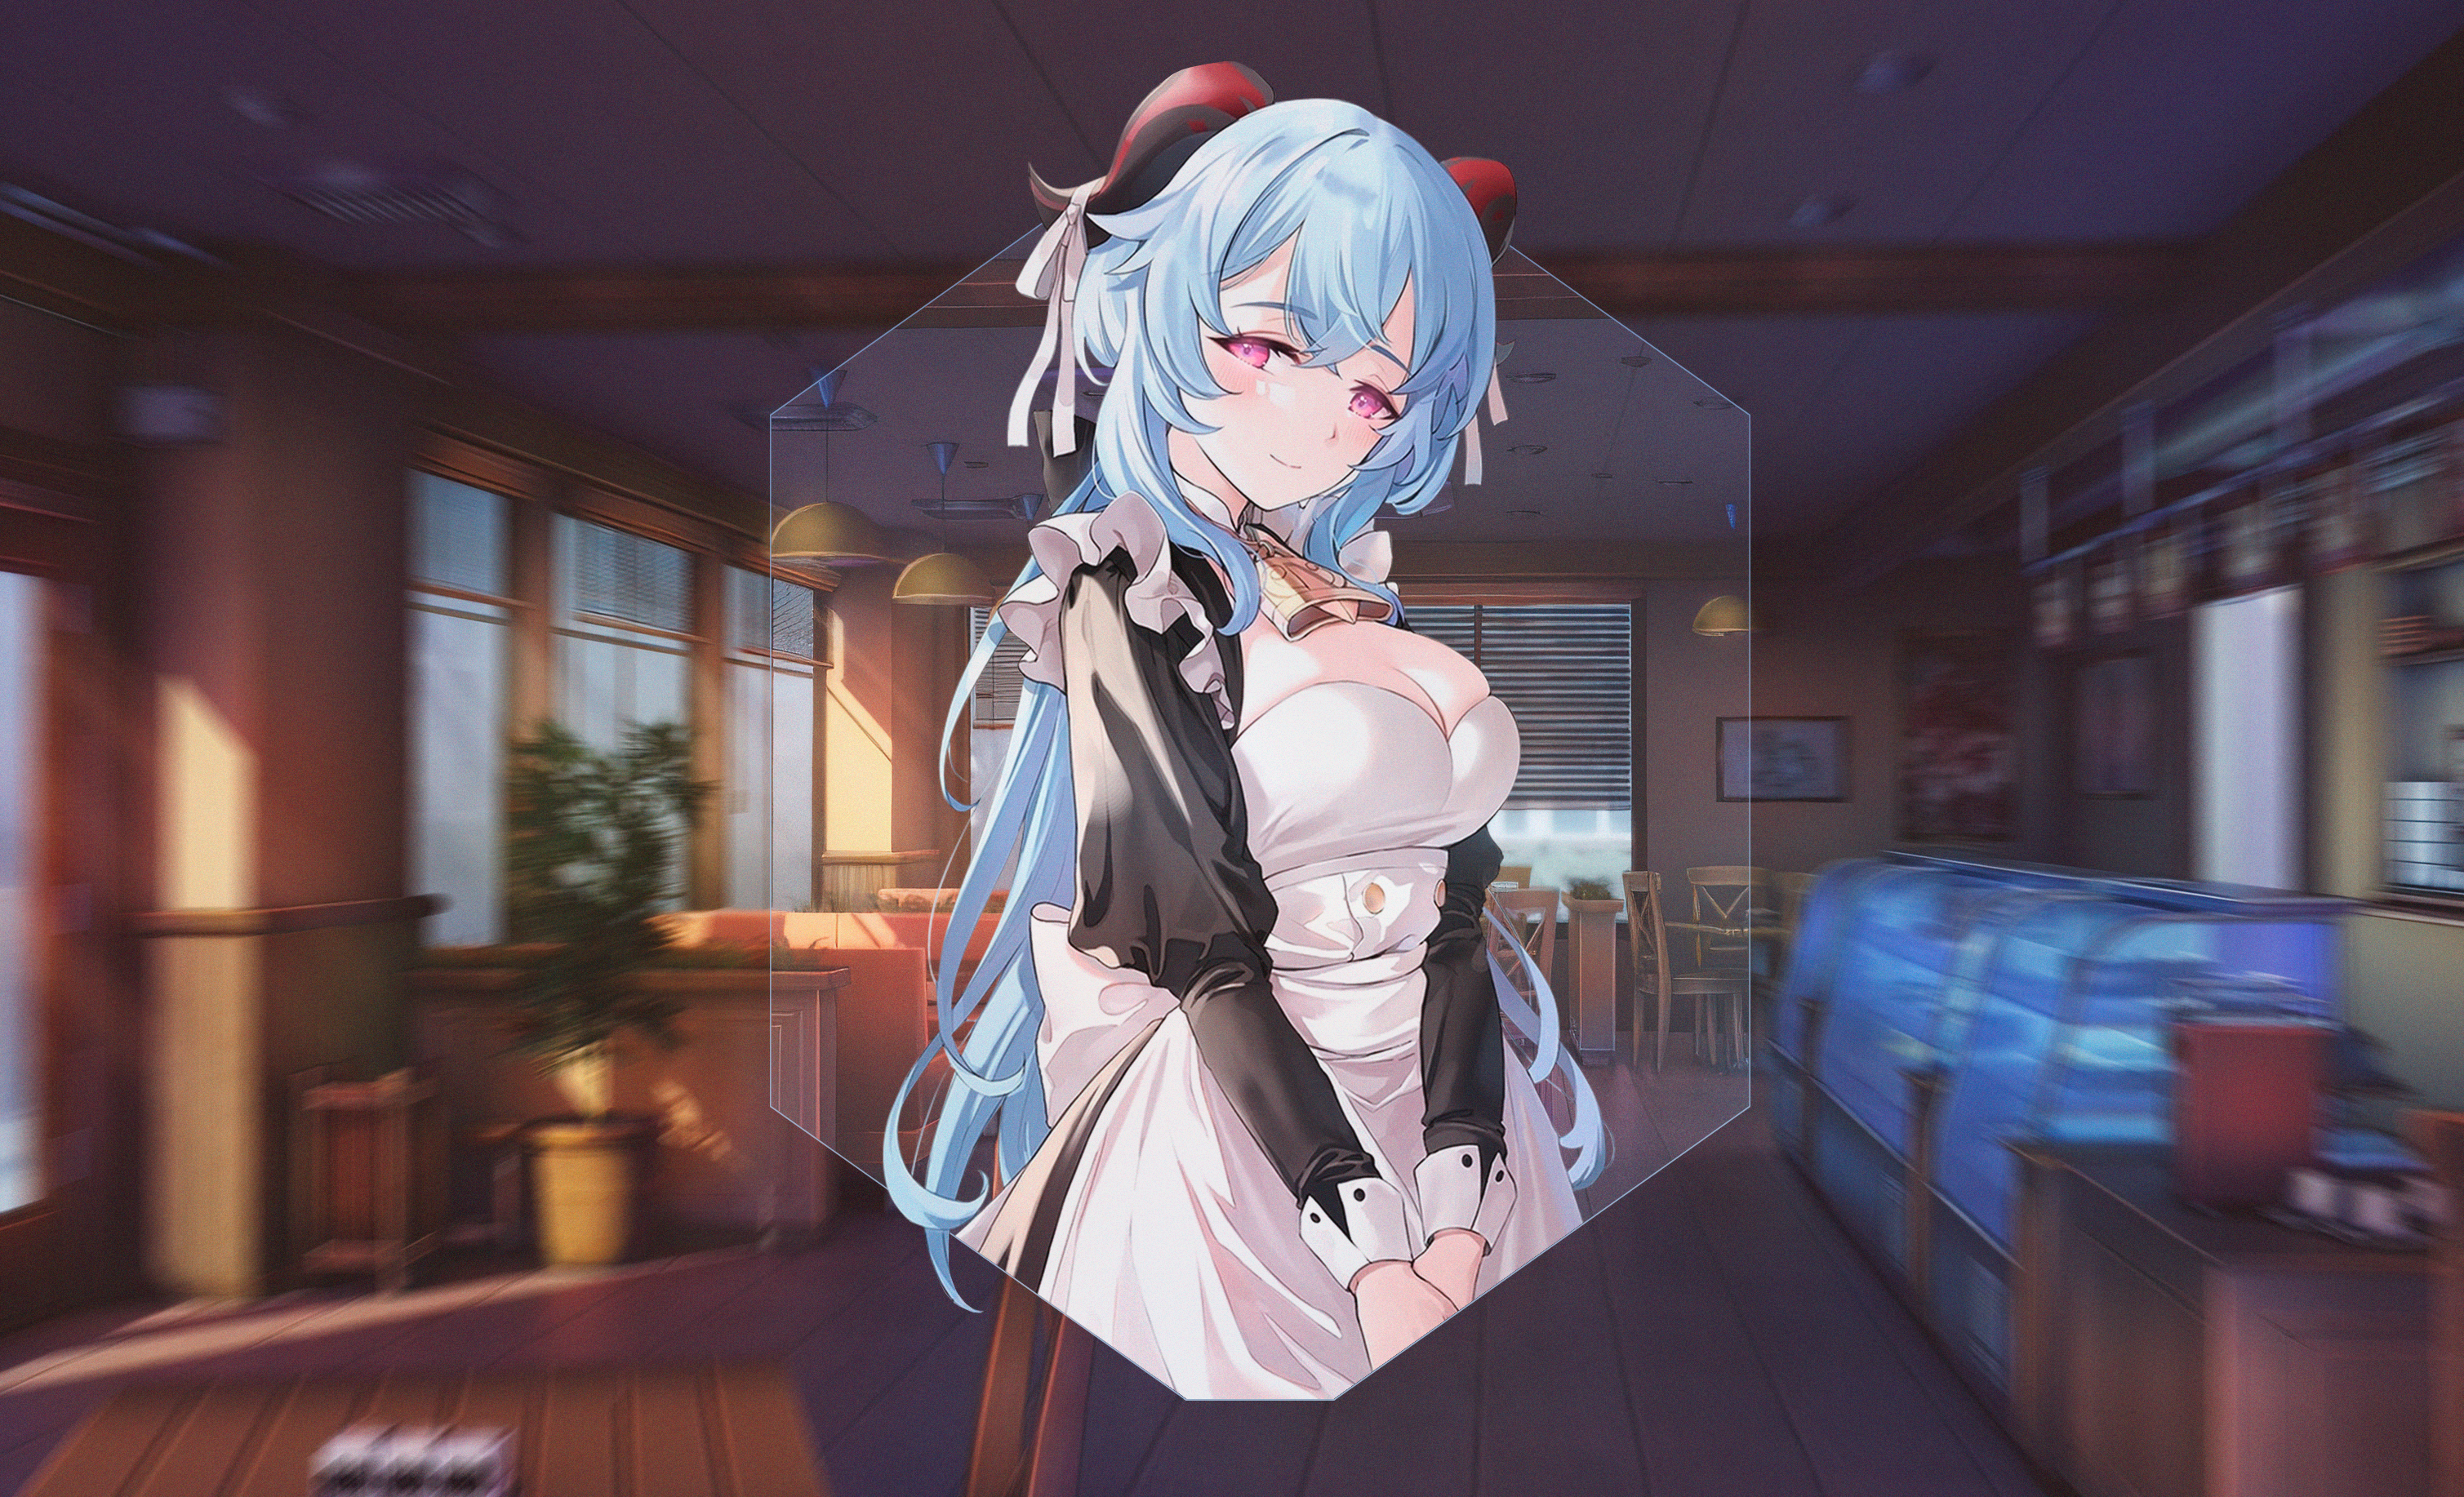 Genshin Impact Ganyu Genshin Impact Anime Girls Picture In Picture Maid Outfit 3018x1834